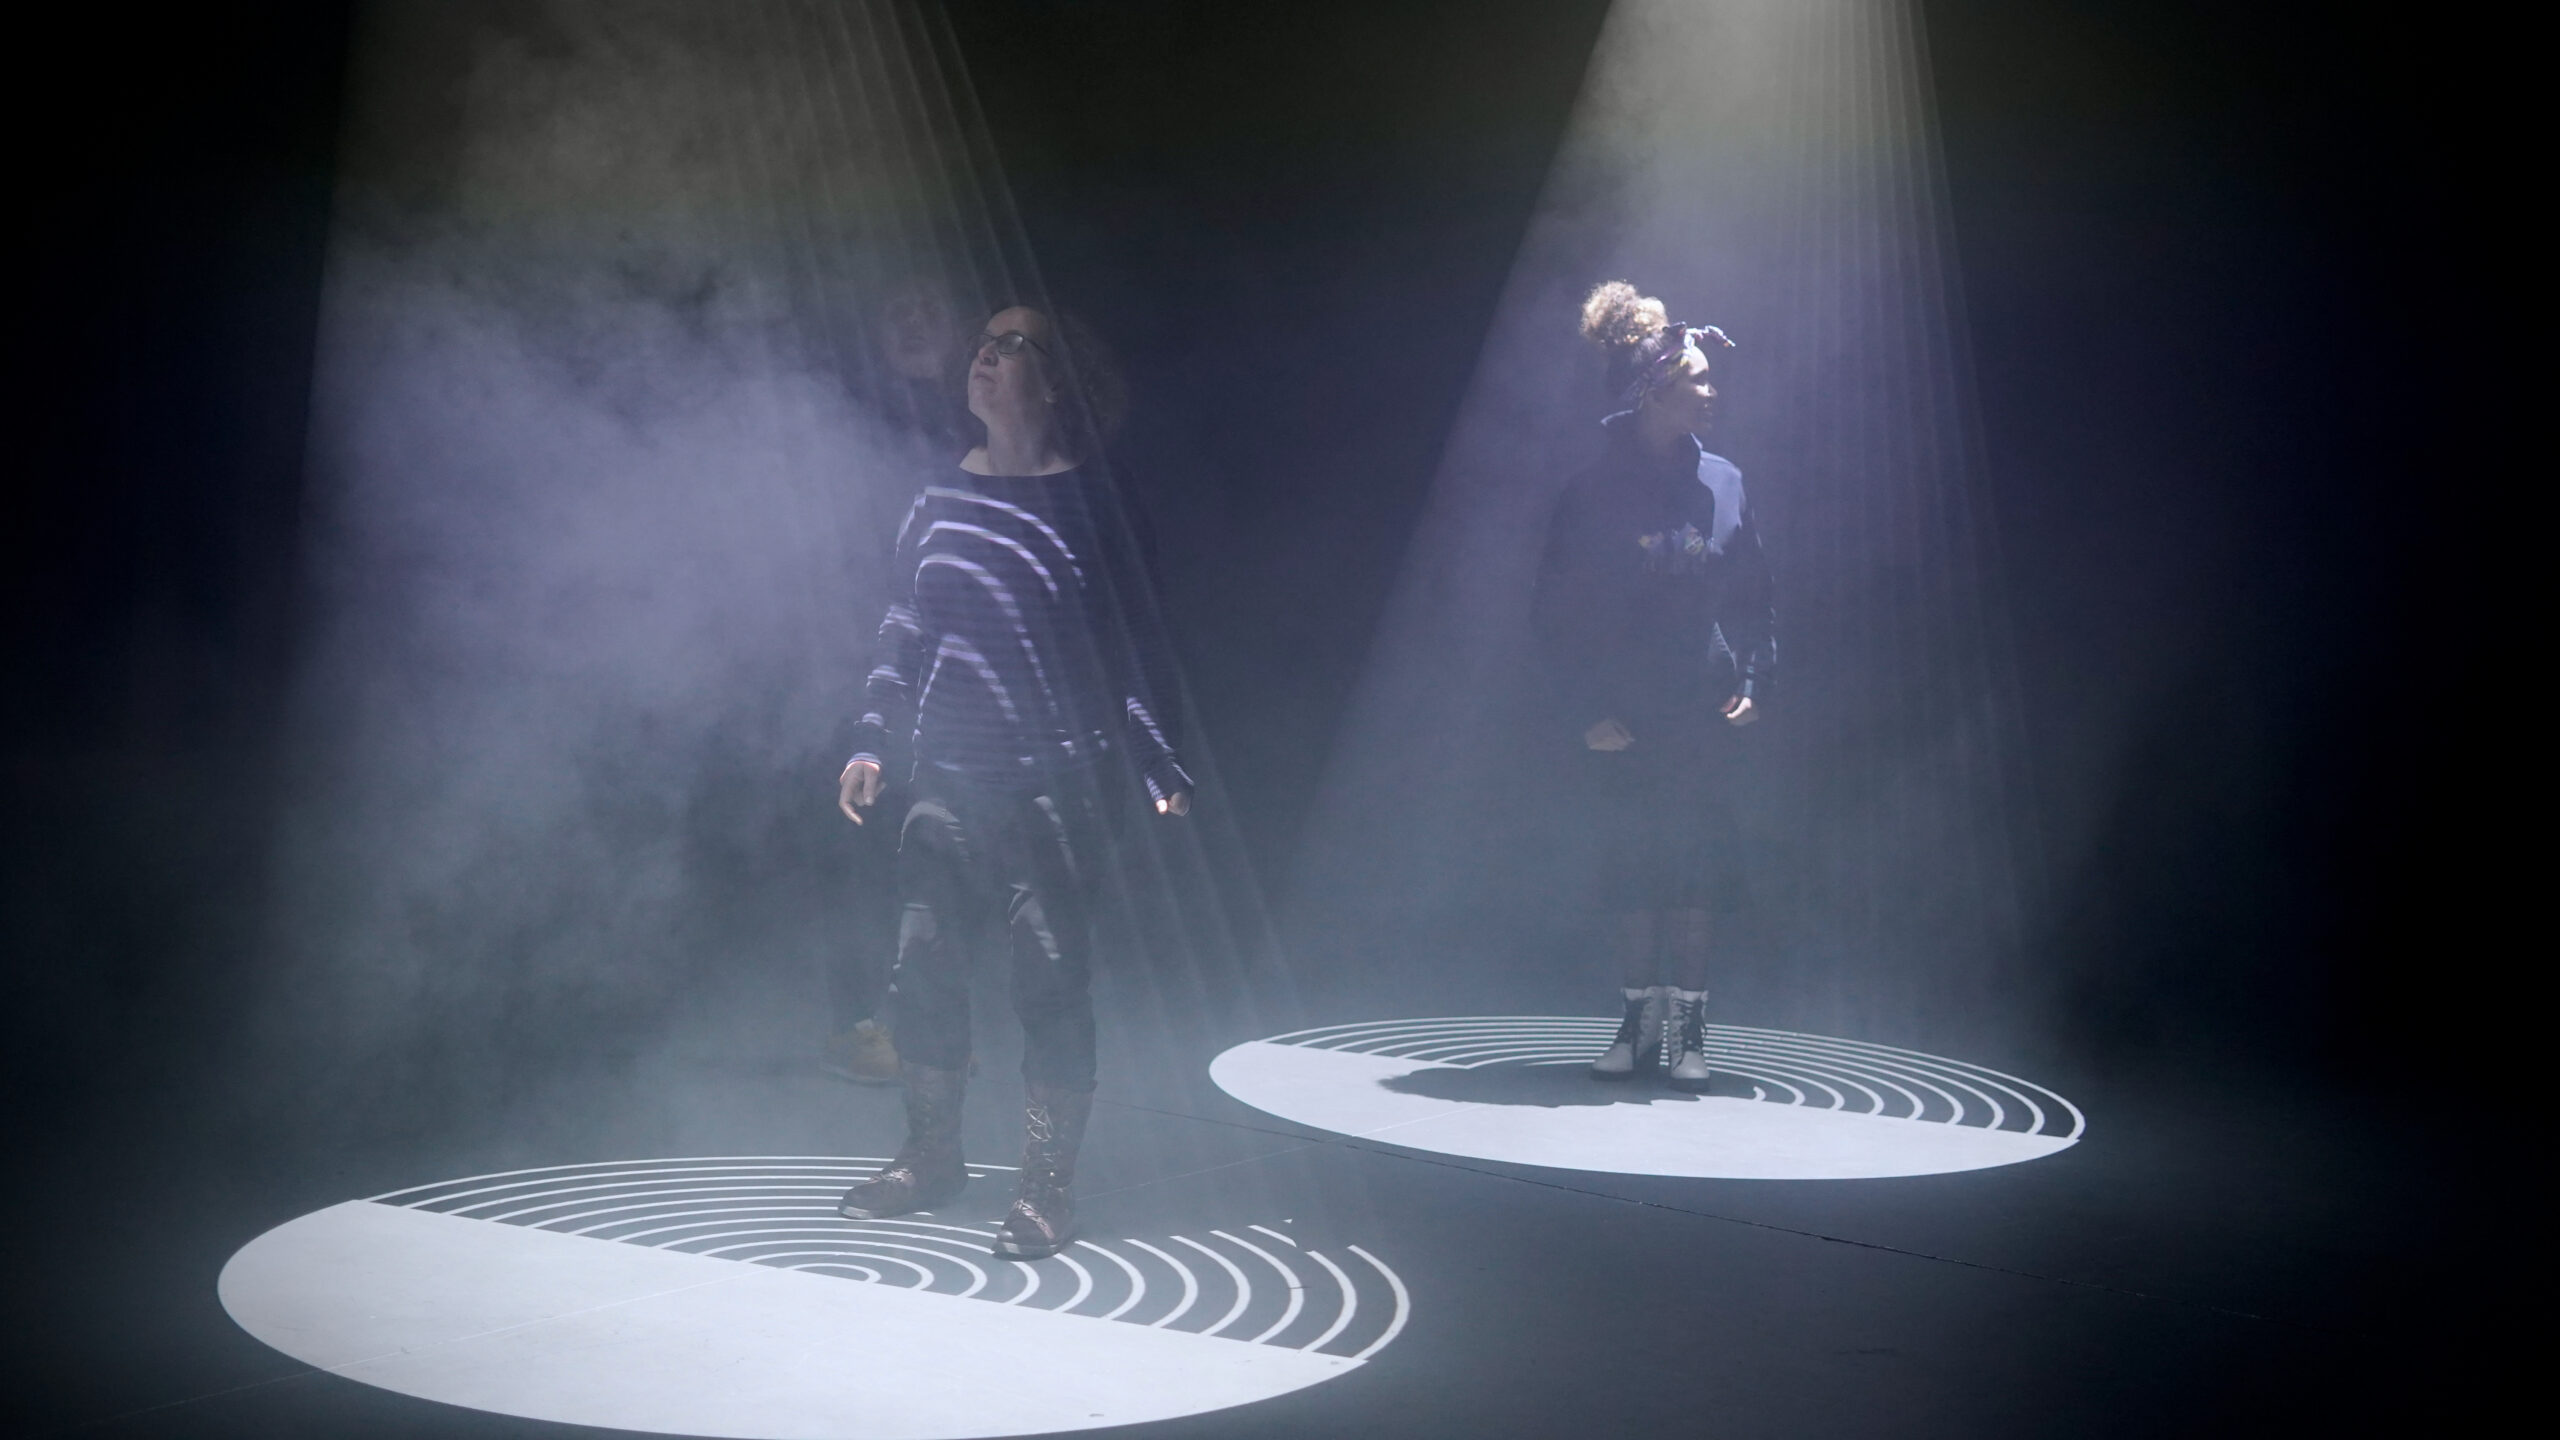 Two people stand in pools of projected light